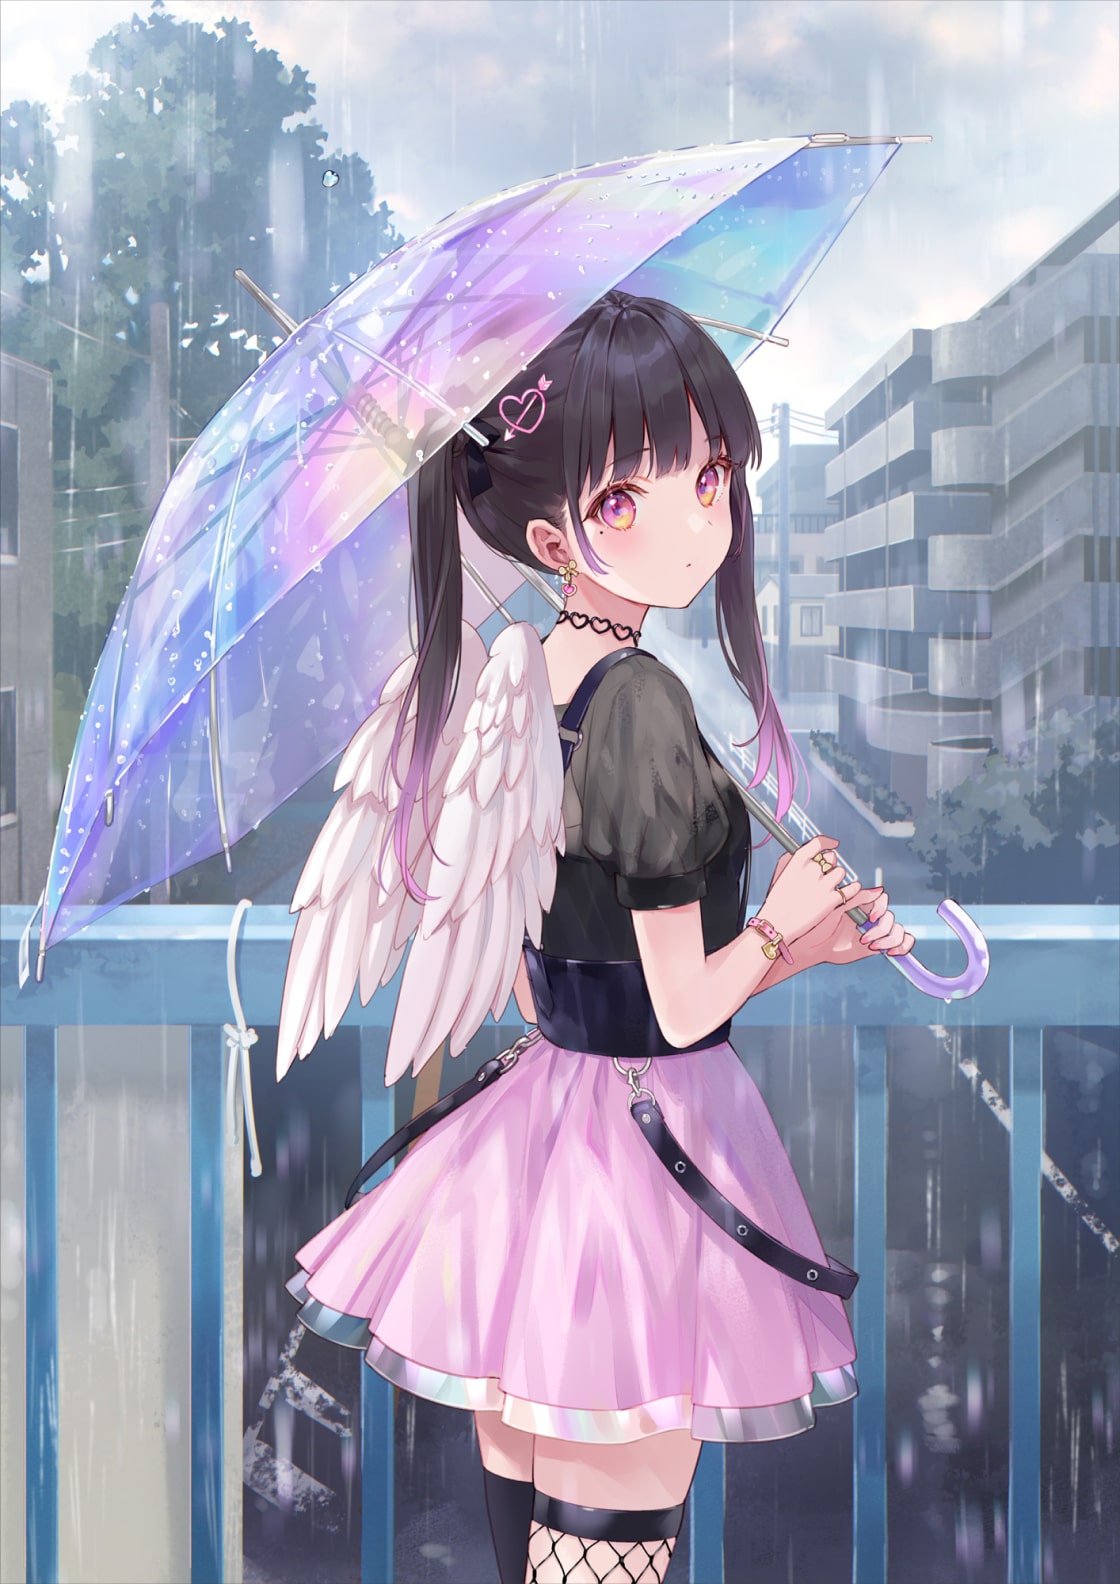 1girl :o angel_wings back bangs black_hair bracelet bridge commentary_request earrings eyebrows_visible_through_hair fishnet_legwear fishnets fukahire_(ruinon) hair_ornament heart heart_hair_ornament highres holding holding_umbrella jewelry looking_at_viewer looking_back necklace original outdoors pink_eyes pink_skirt puffy_short_sleeves puffy_sleeves railing rain shirt short_sleeves skirt solo suspender_skirt suspenders thigh-highs transparent transparent_umbrella twintails twitter_username umbrella urban water_drop wings